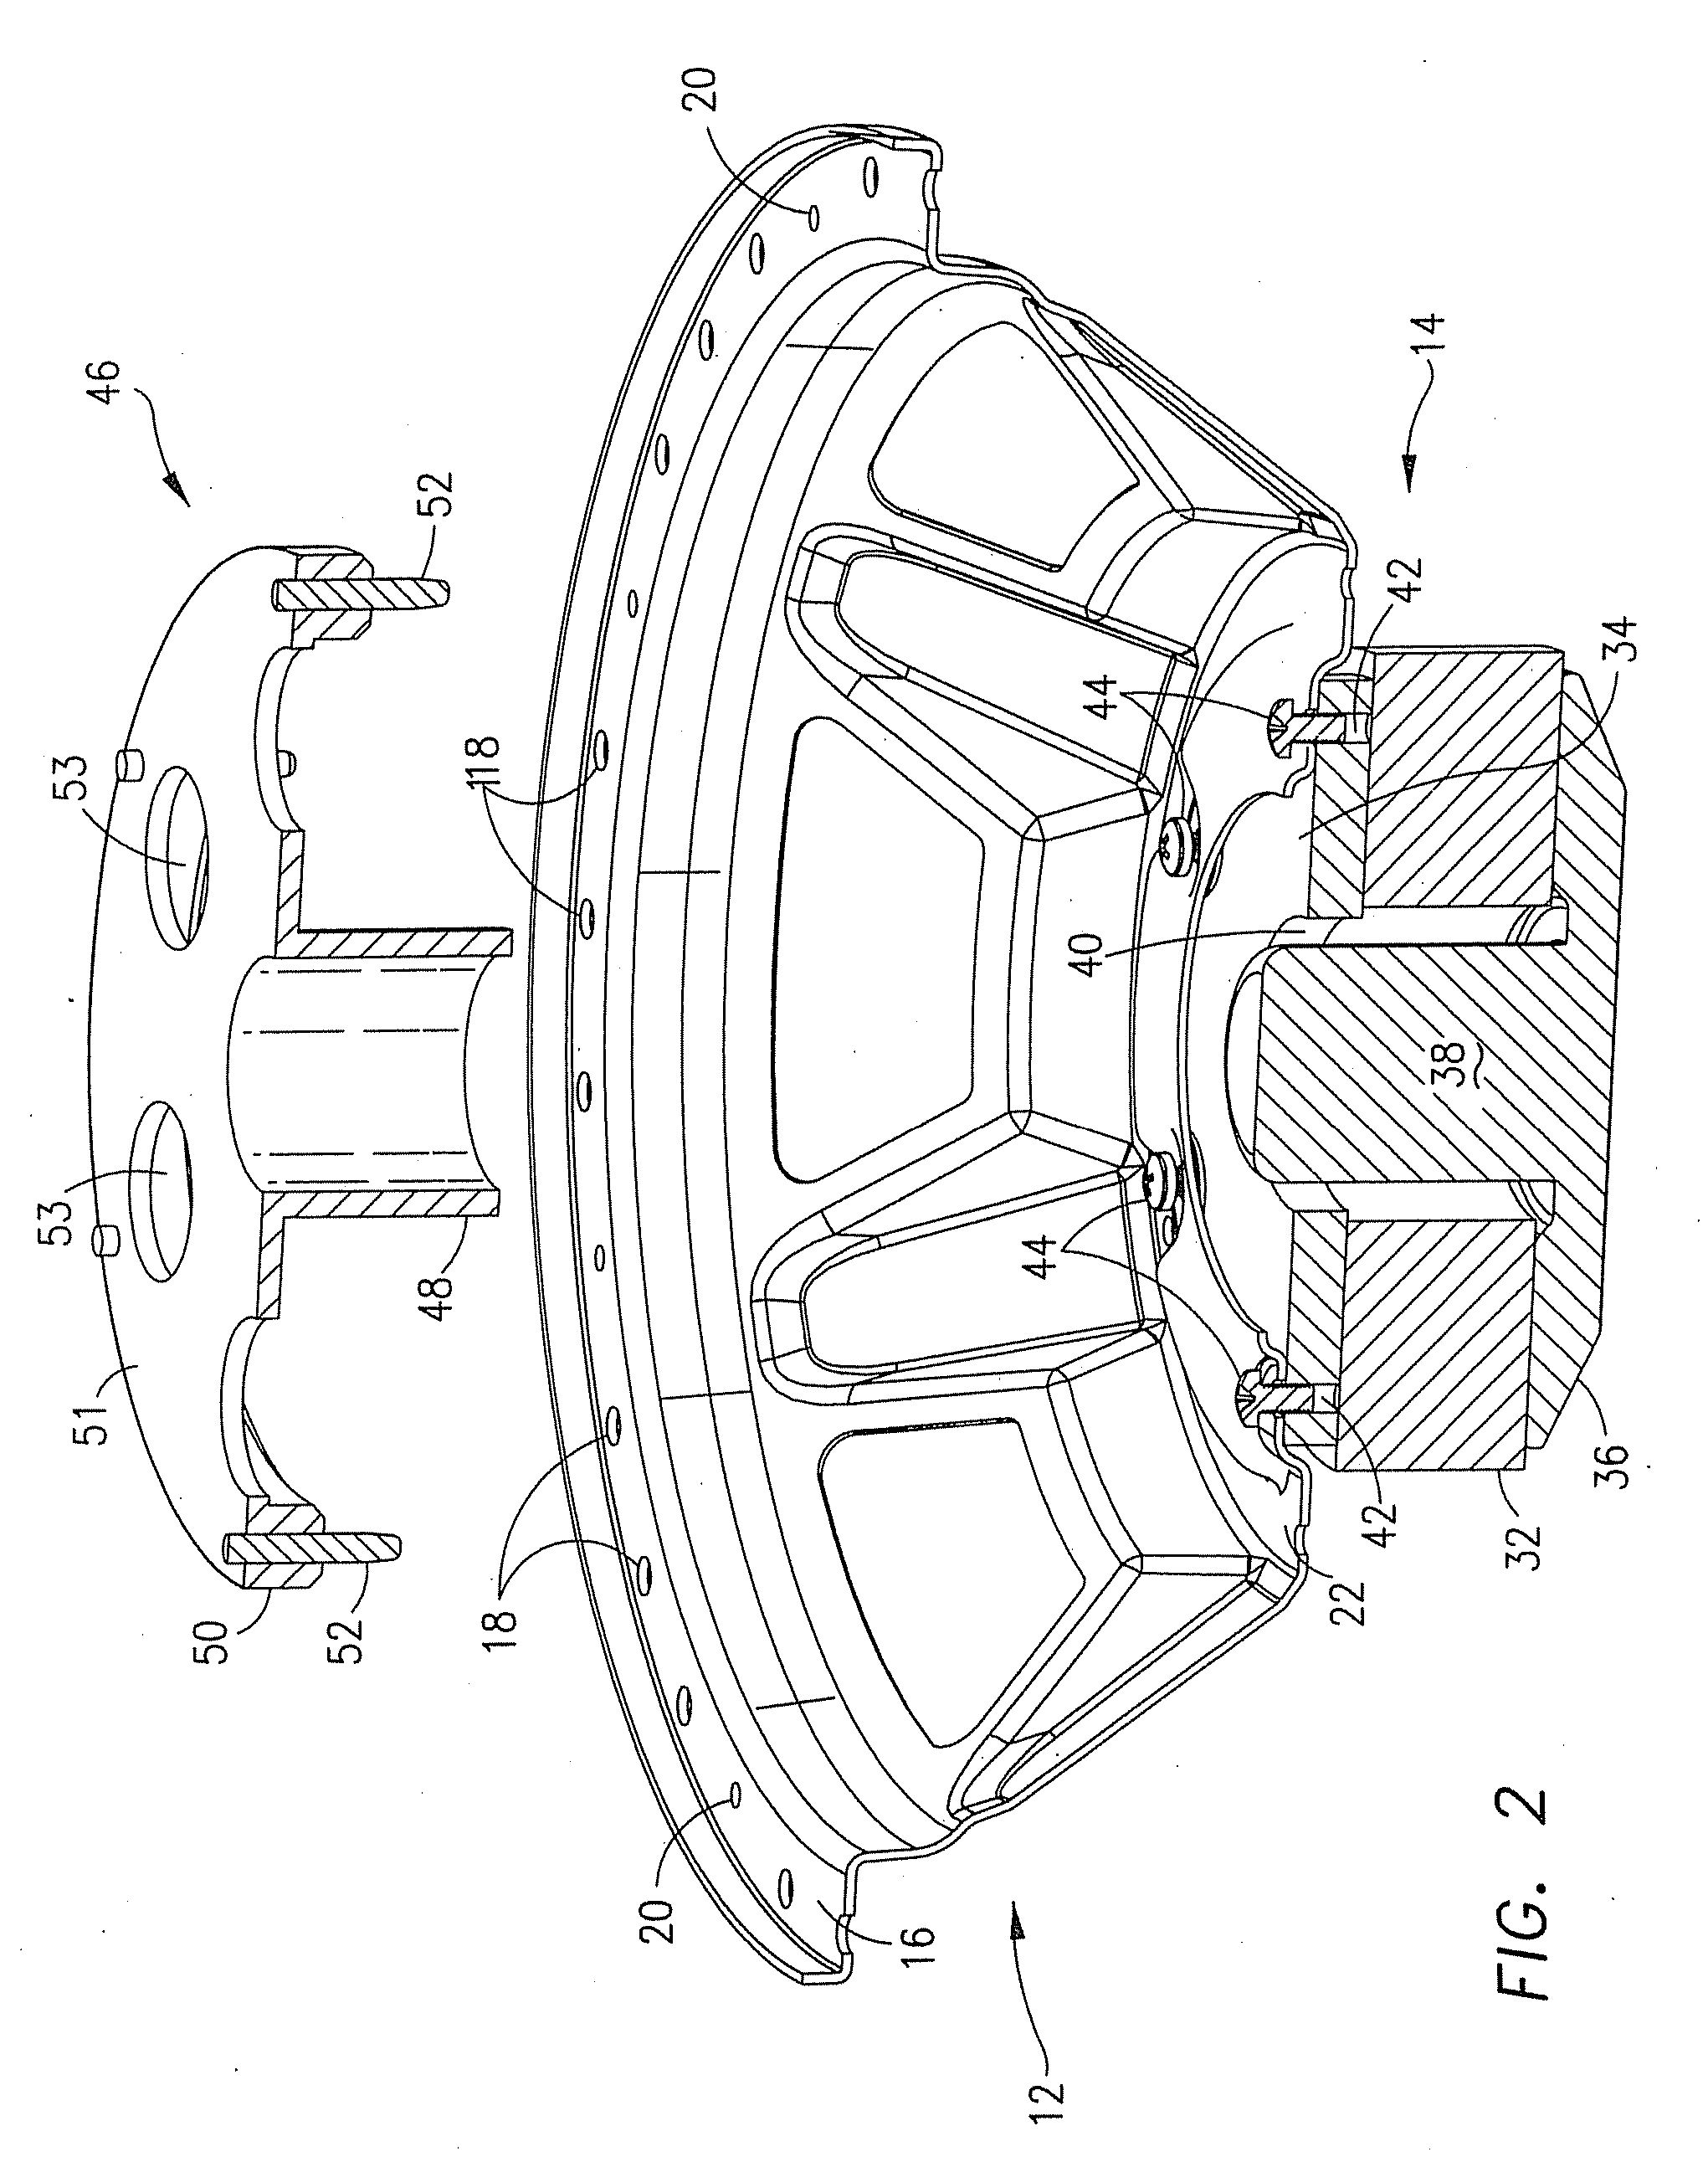 Loudspeaker with field replaceable parts and method of assembly